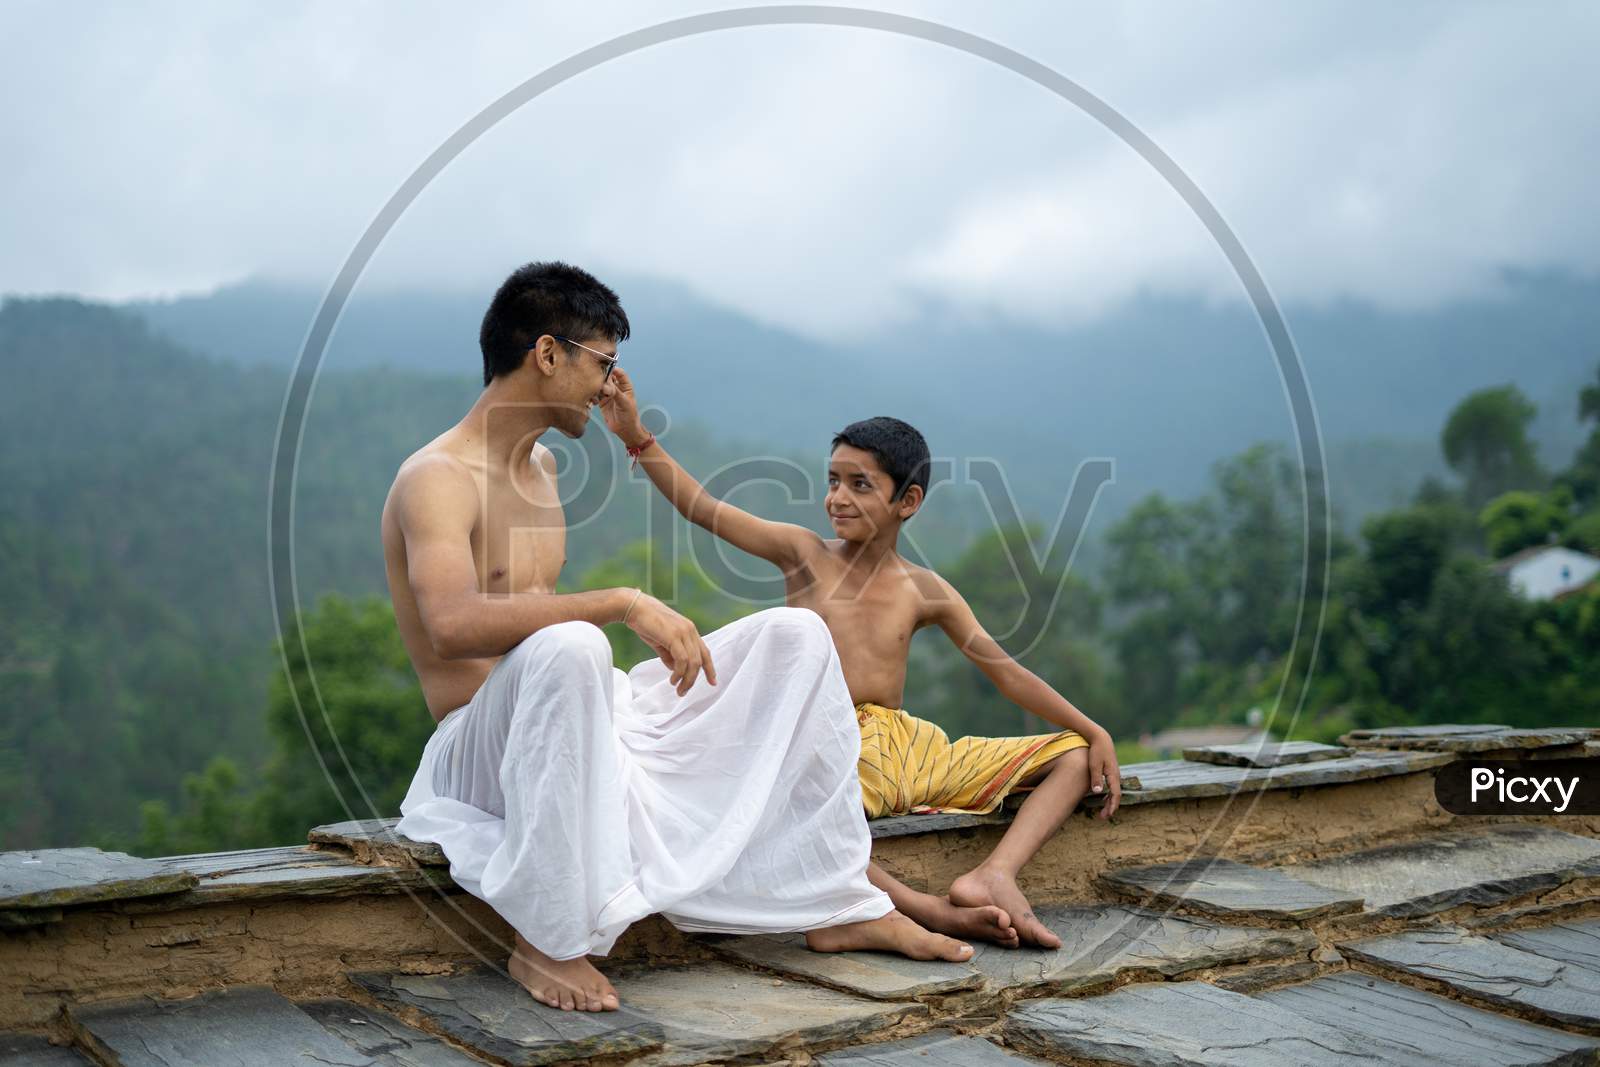 A Young Man Playing With His Younger Brother With Blurred Mountains In The Back.